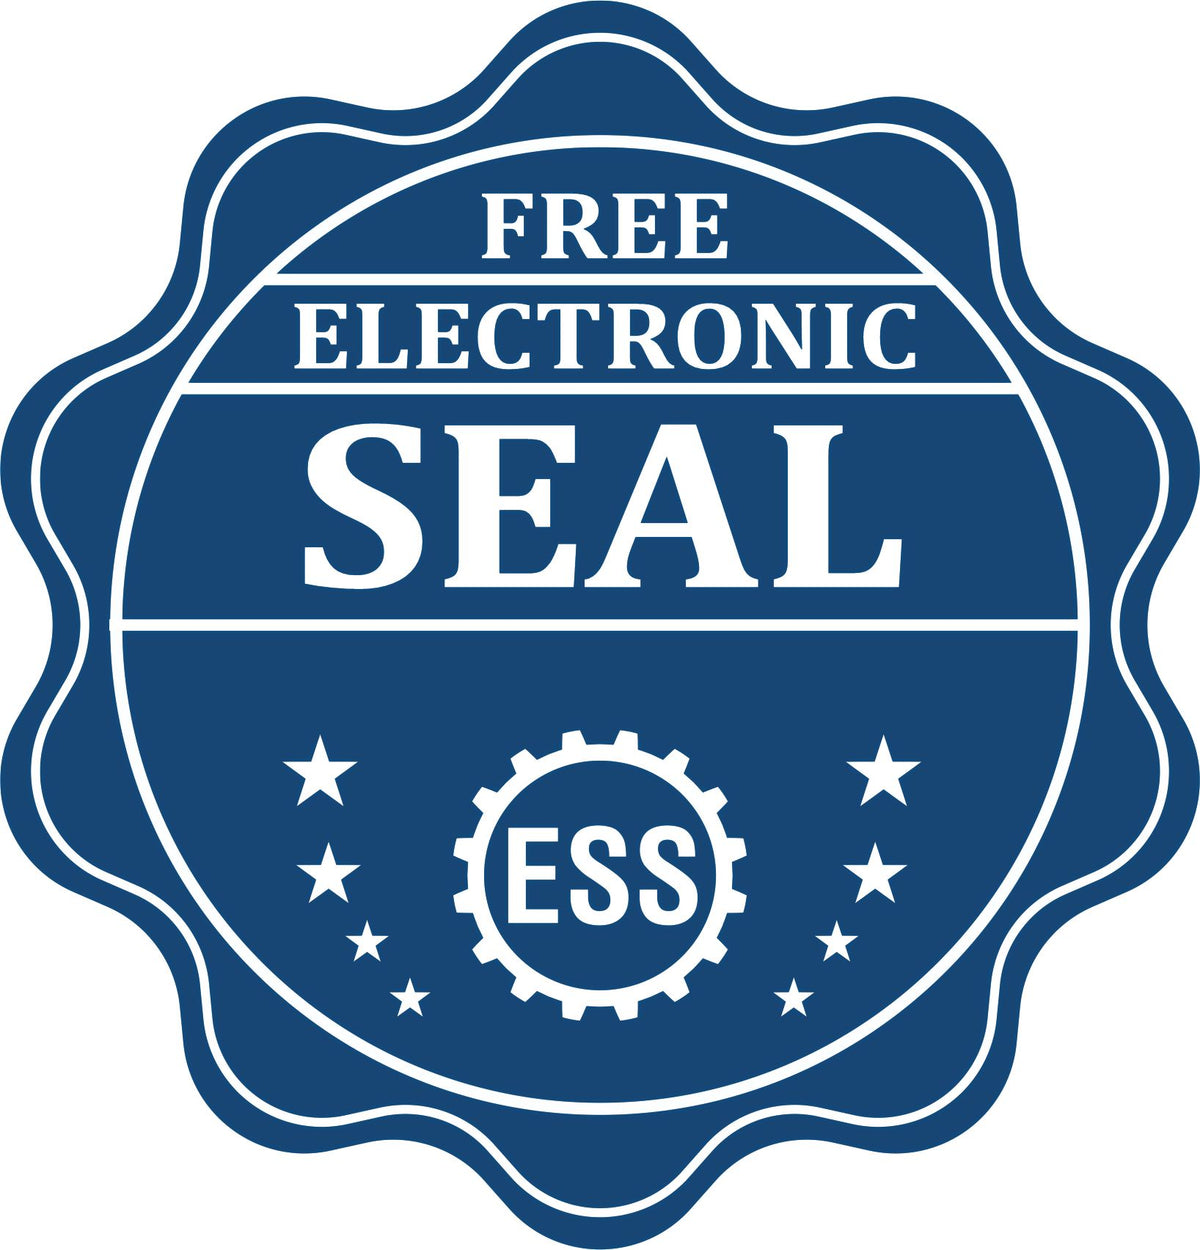 A badge showing a free electronic seal for the Heavy Duty Cast Iron Arkansas Geologist Seal Embosser with stars and the ESS gear on the emblem.